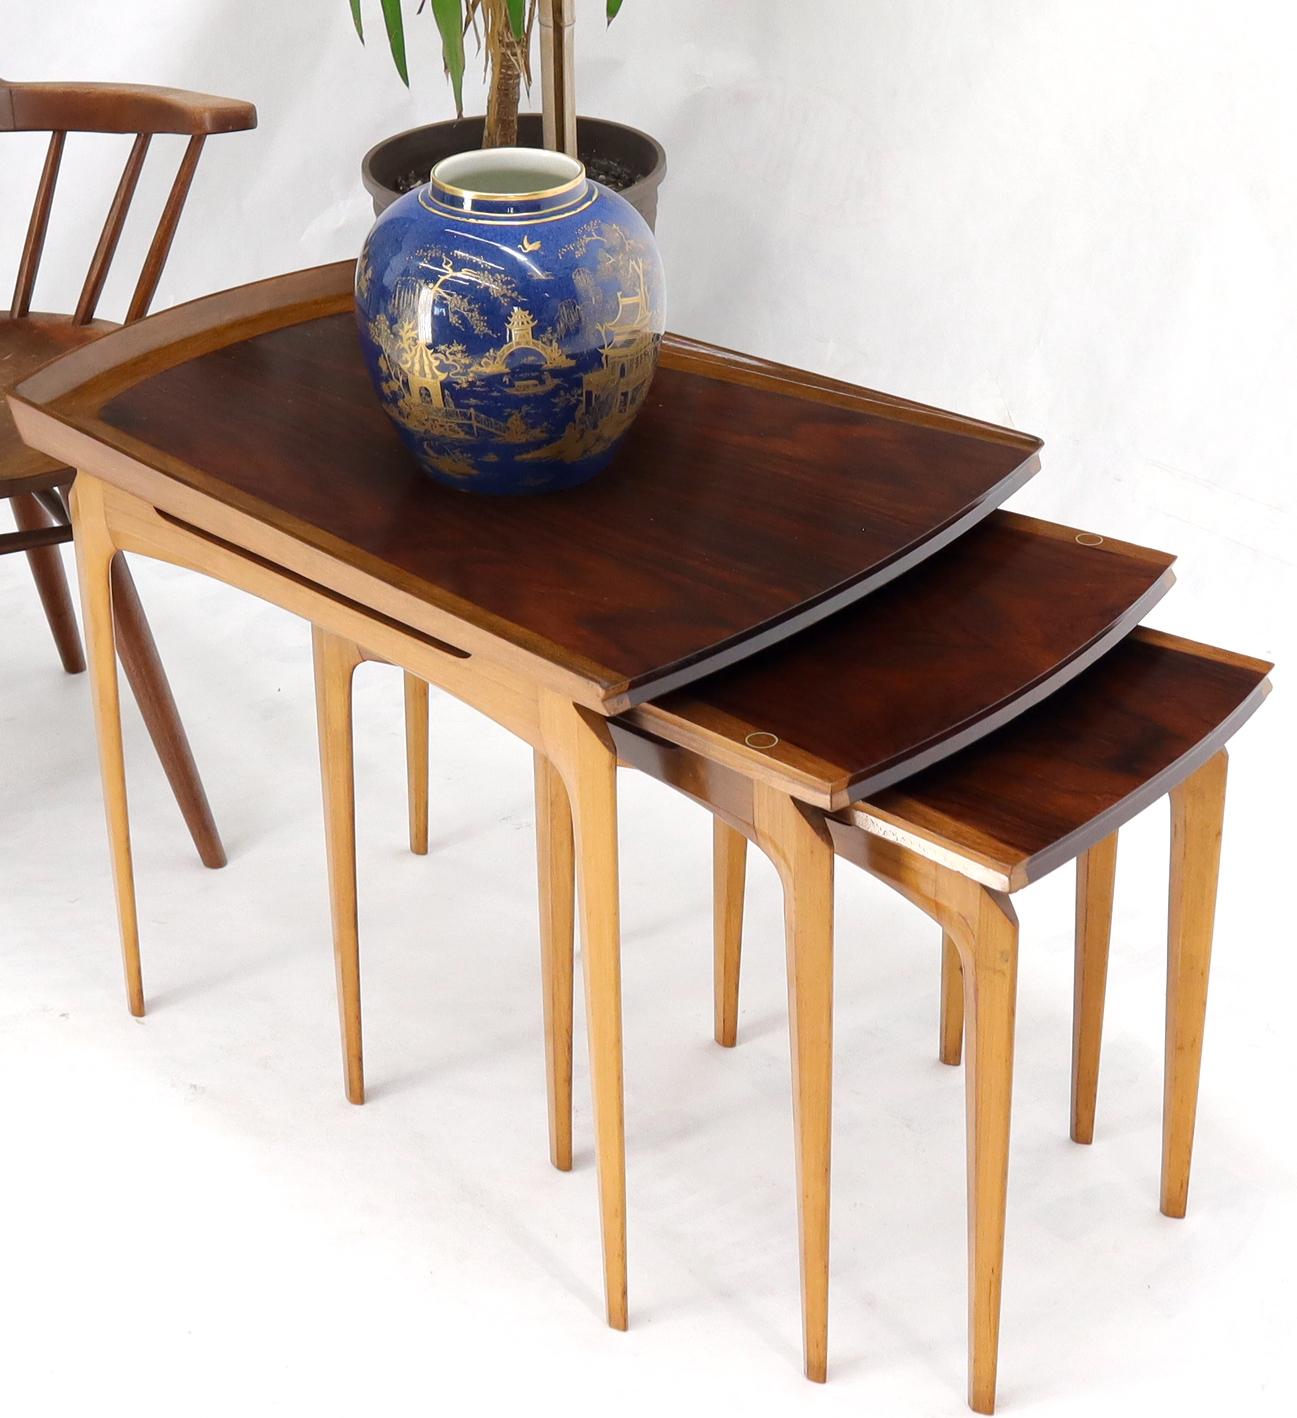 Stunning design birch and rosewood tops Mid-Century Modern nesting tables with brass circle inlays by Erno Fabry. Made in Belgium.